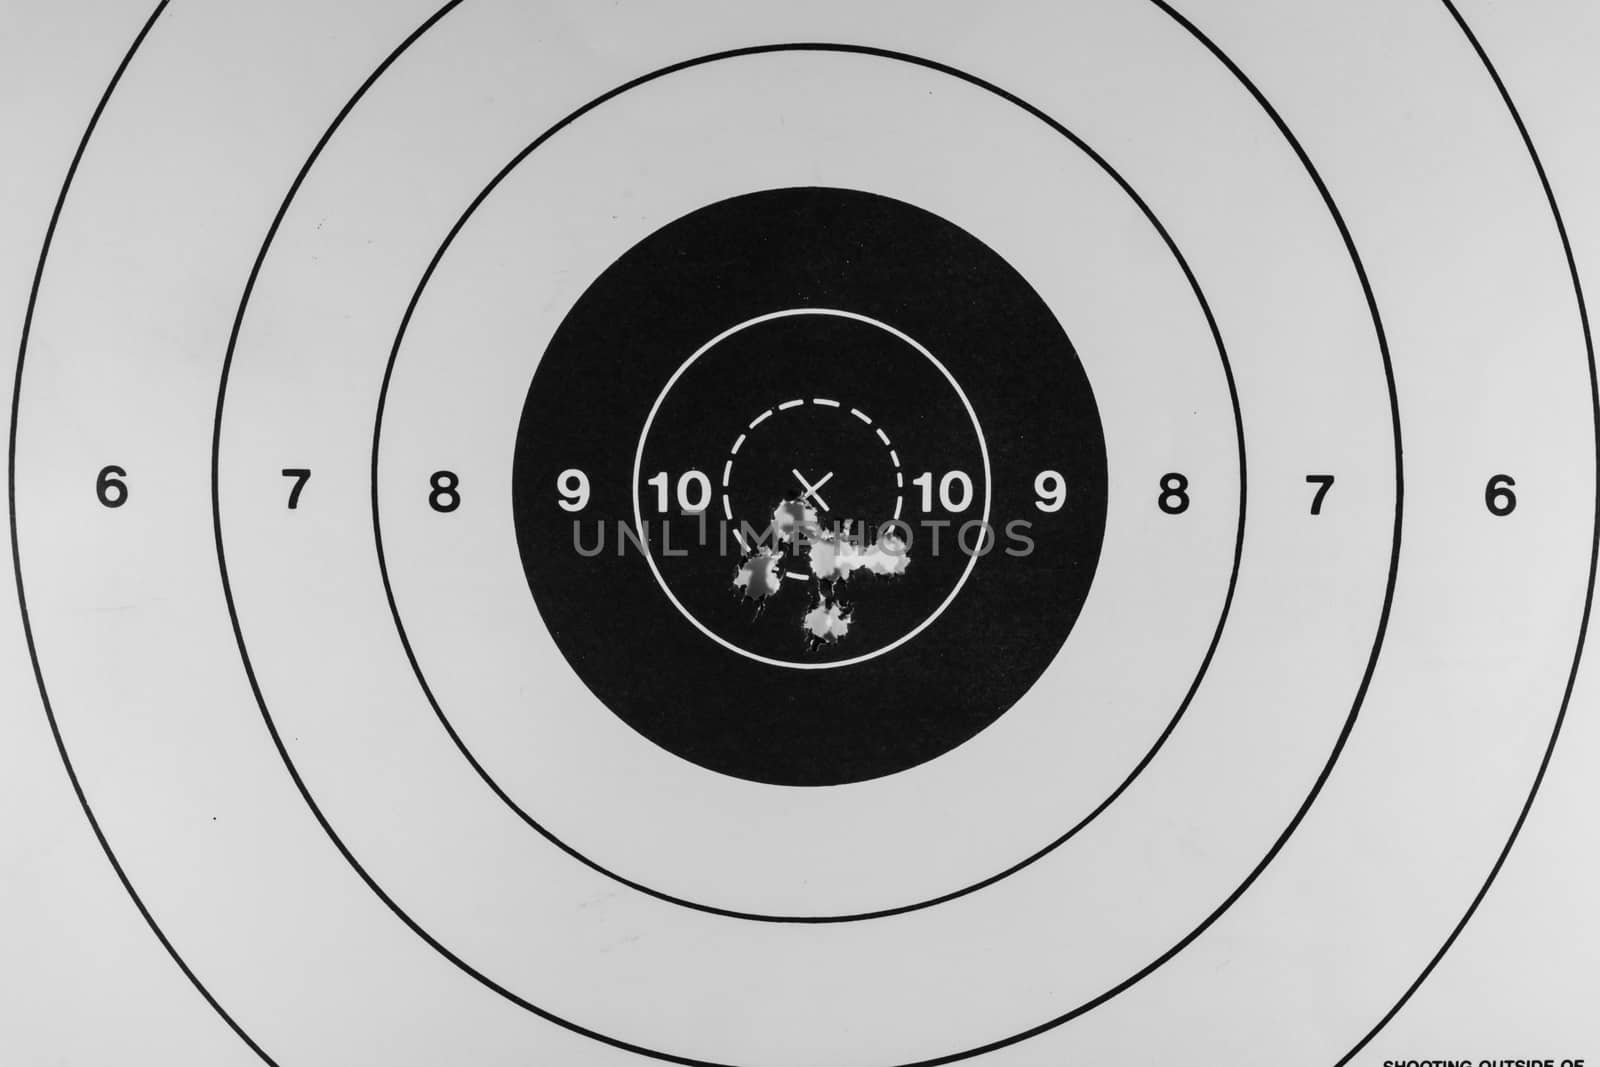 Nice tight grouping of five shots on a paper target